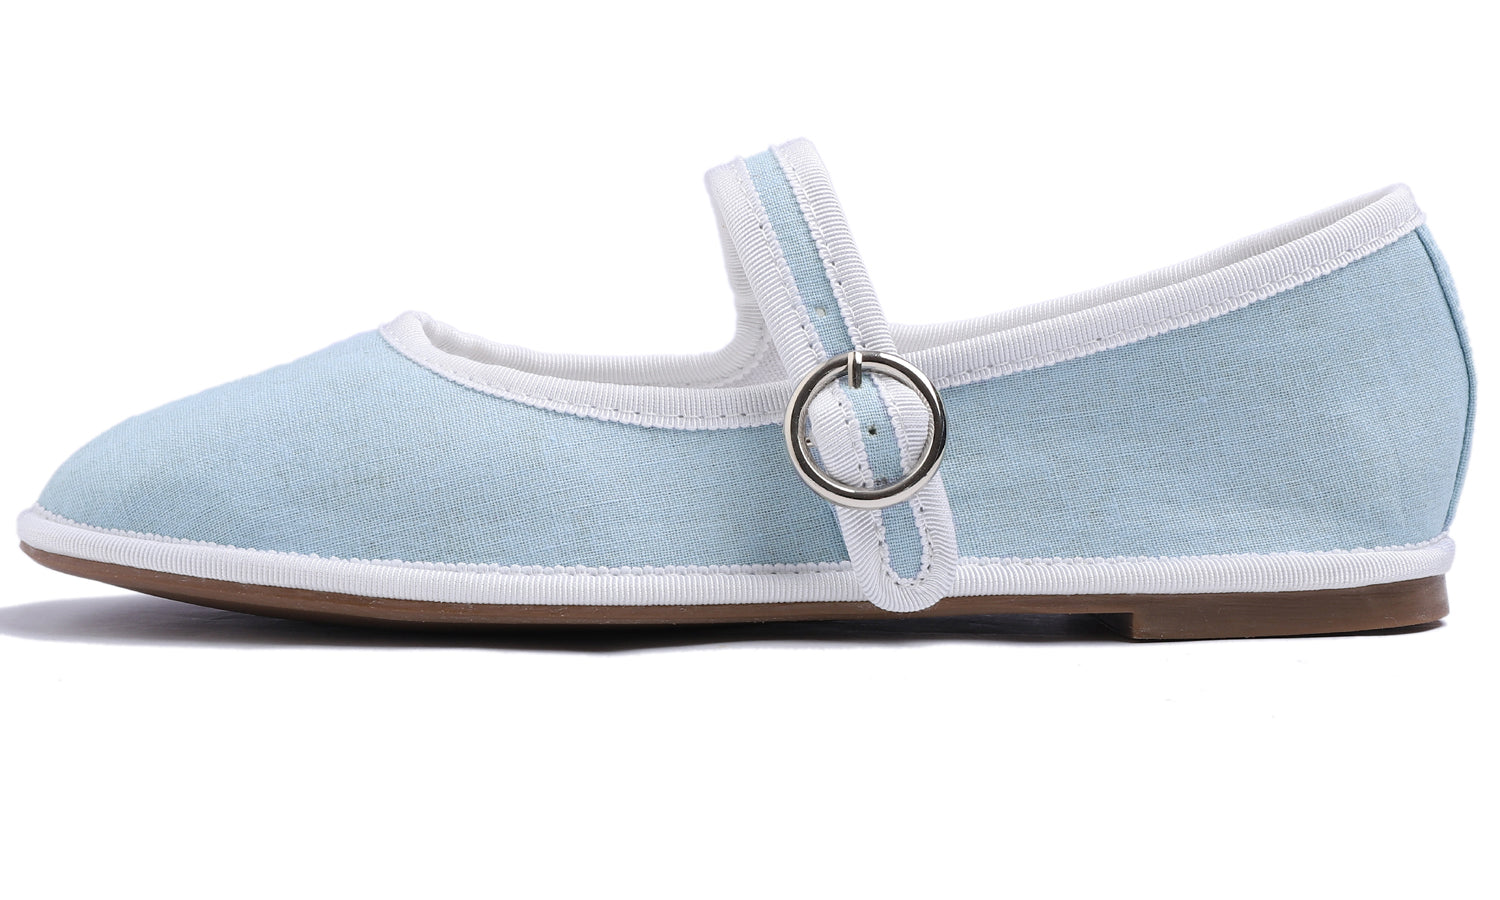 Feversole Women's Soft Breathable Mary Jane Memory Foam Cushioned Comfort Round Toe Metal Buckle Flats Walking Shoes Light Blue Canvas